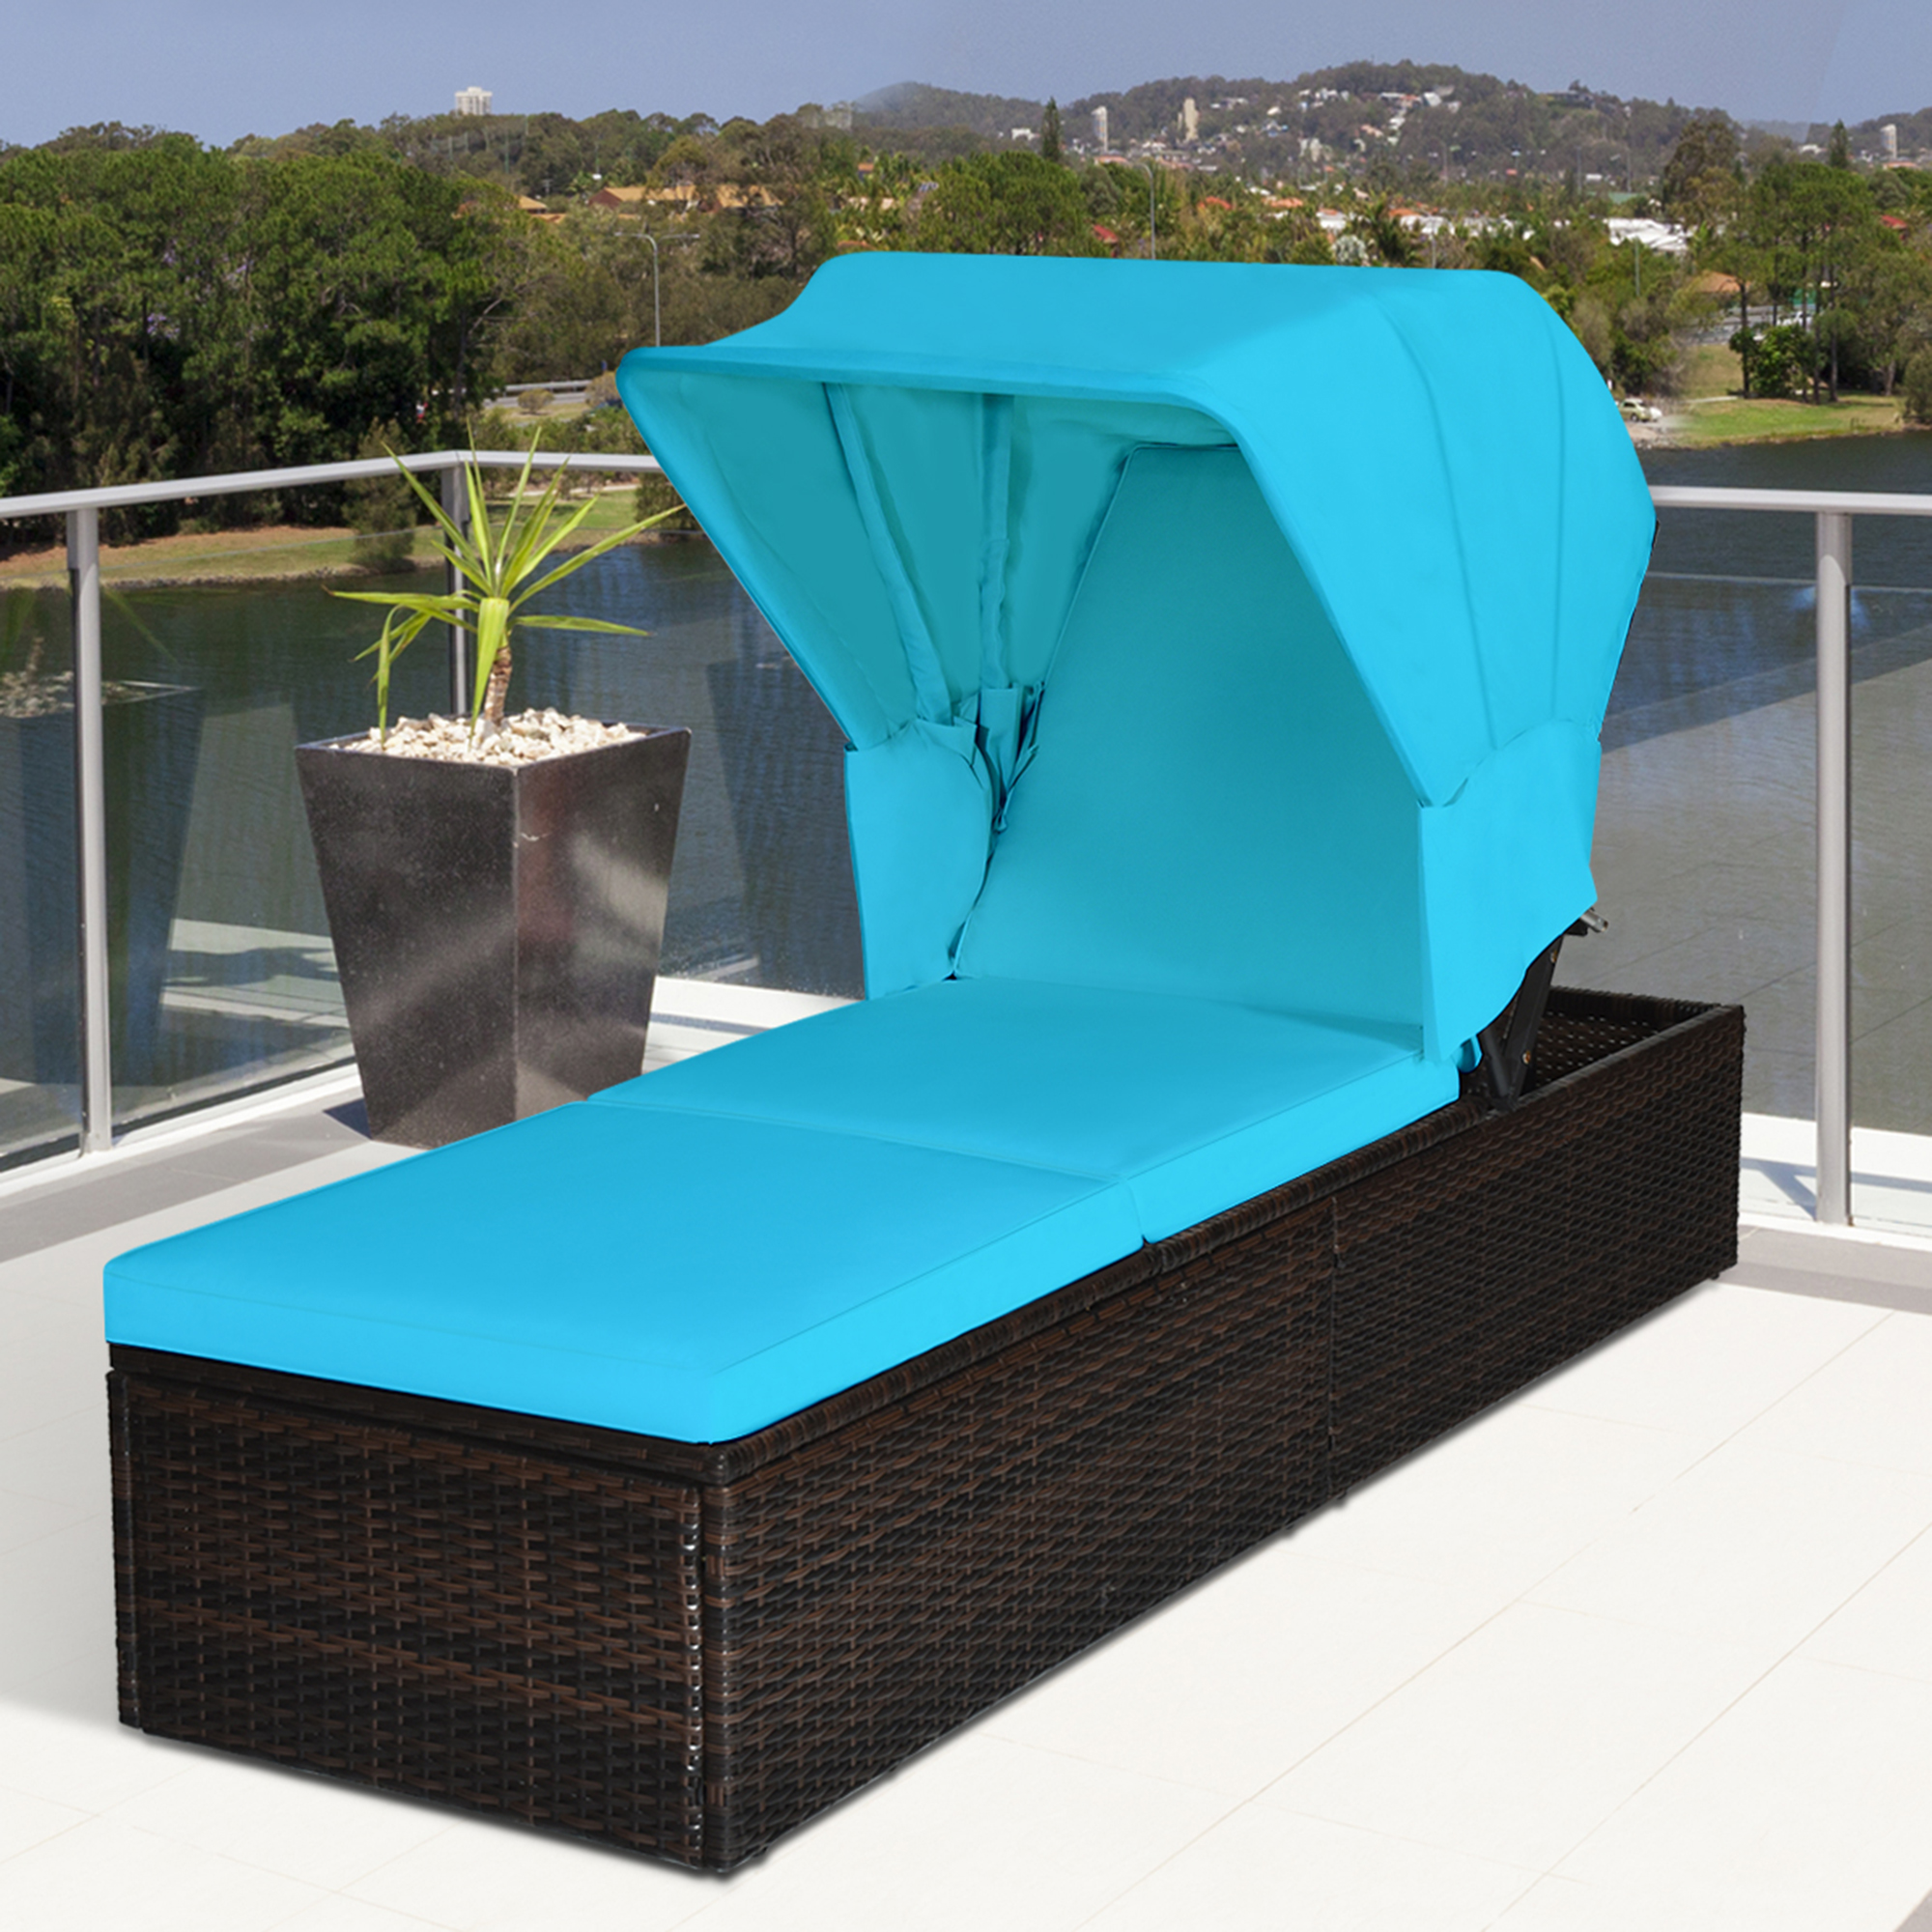 Gymax Rattan Patio Chaise Lounge Chair W/ Adjustable Canopy Turquoise Cushion - image 1 of 10